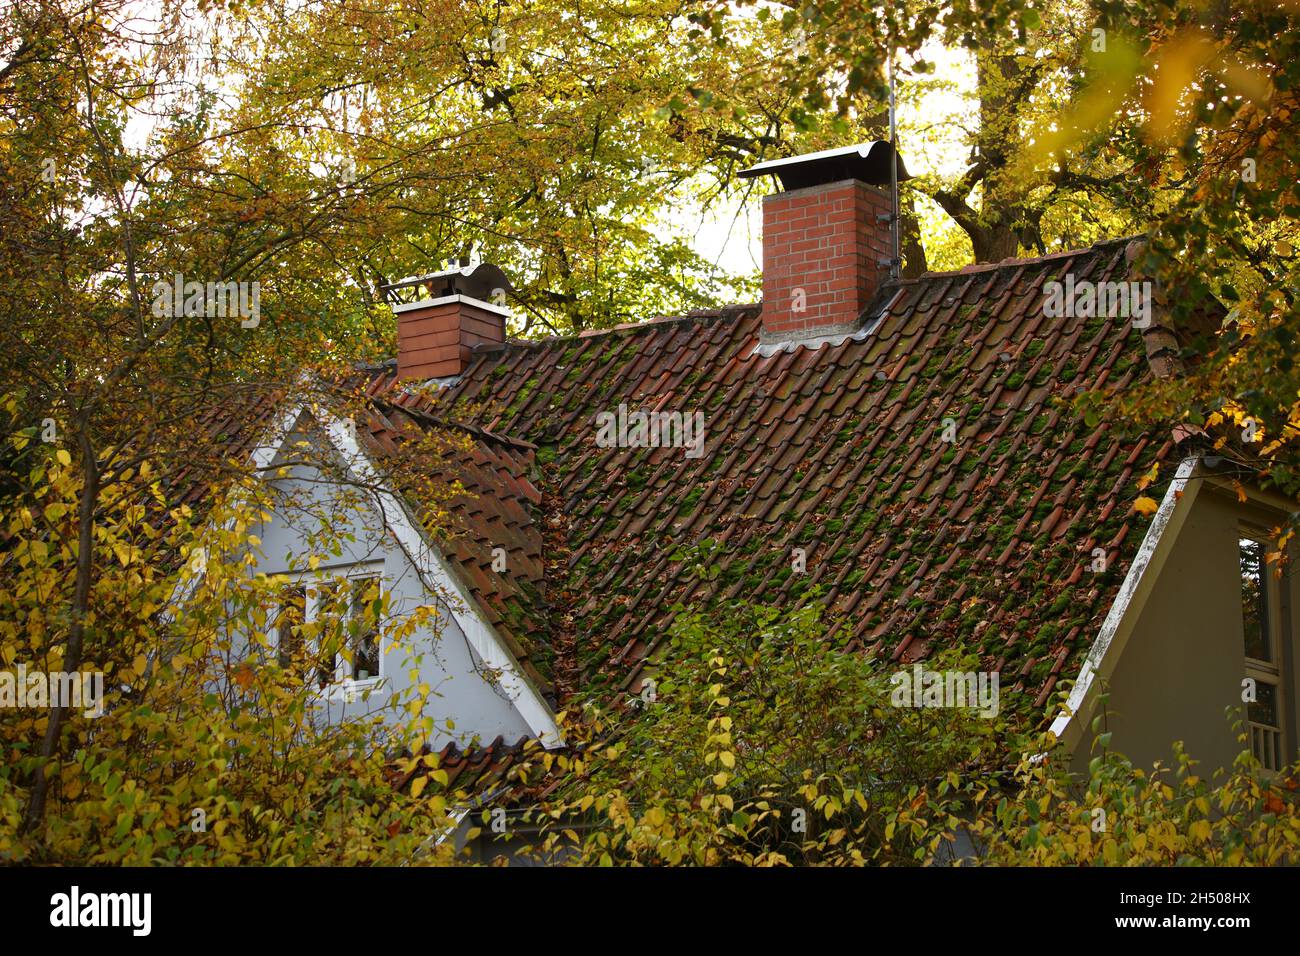 roof with dormer of a house amidst trees Stock Photo